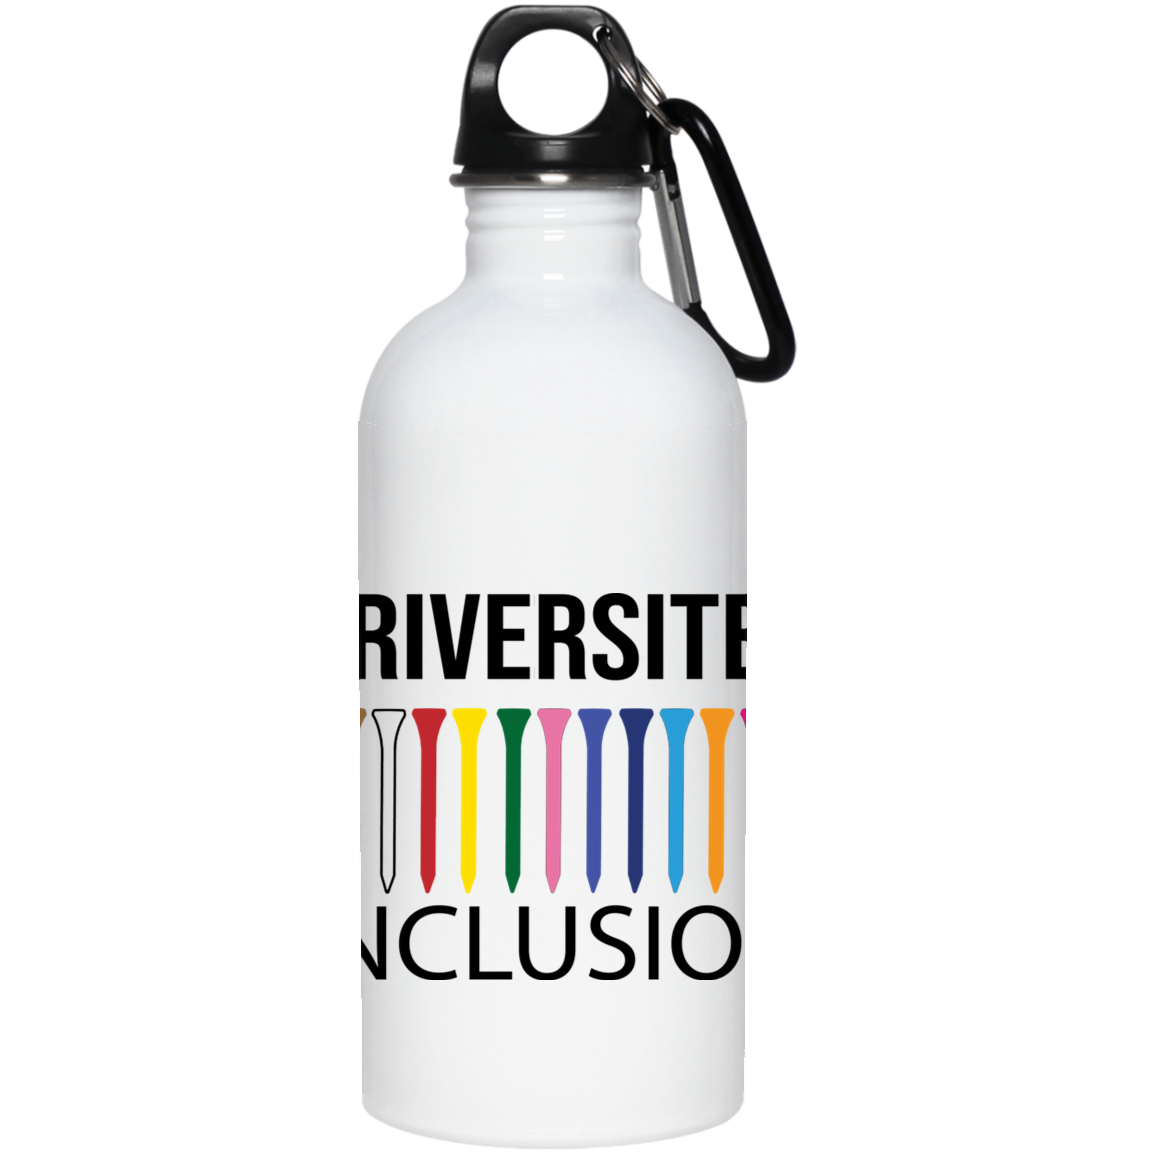 ZZZ#06 OPG Custom Design. DRIVER-SITEE & INCLUSION. 20 oz. Stainless Steel Water Bottle